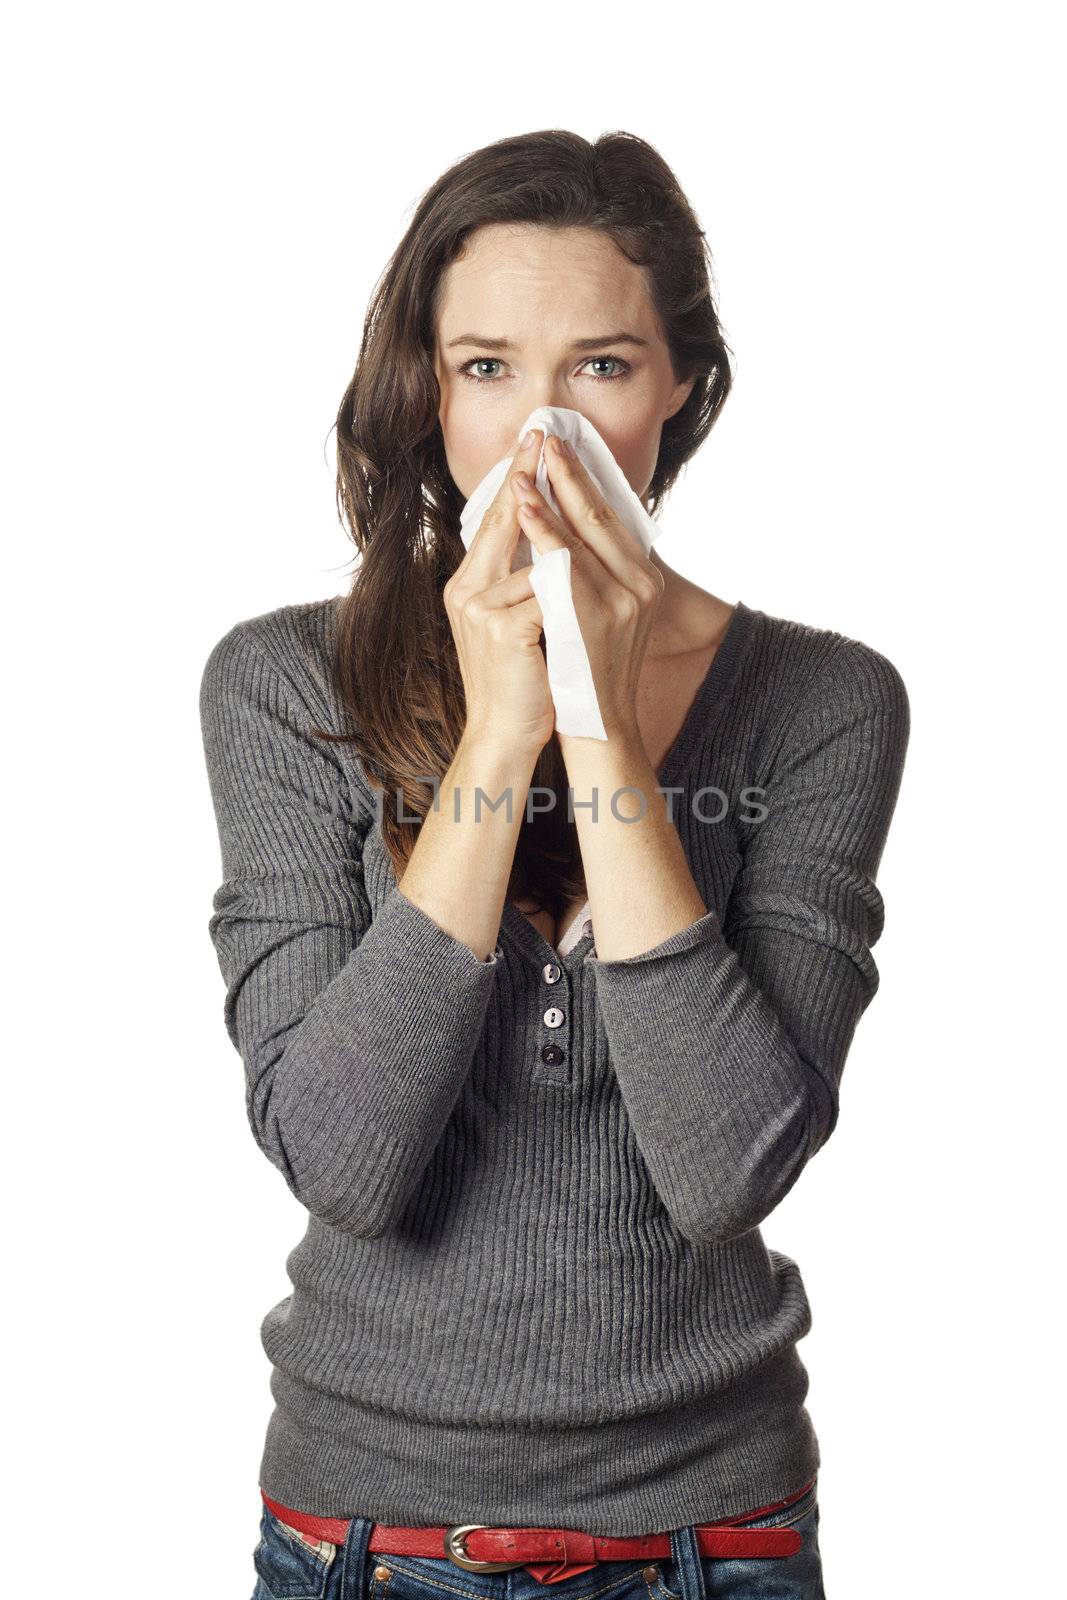 A woman with a cold or allergy wiping or blowing her nose.